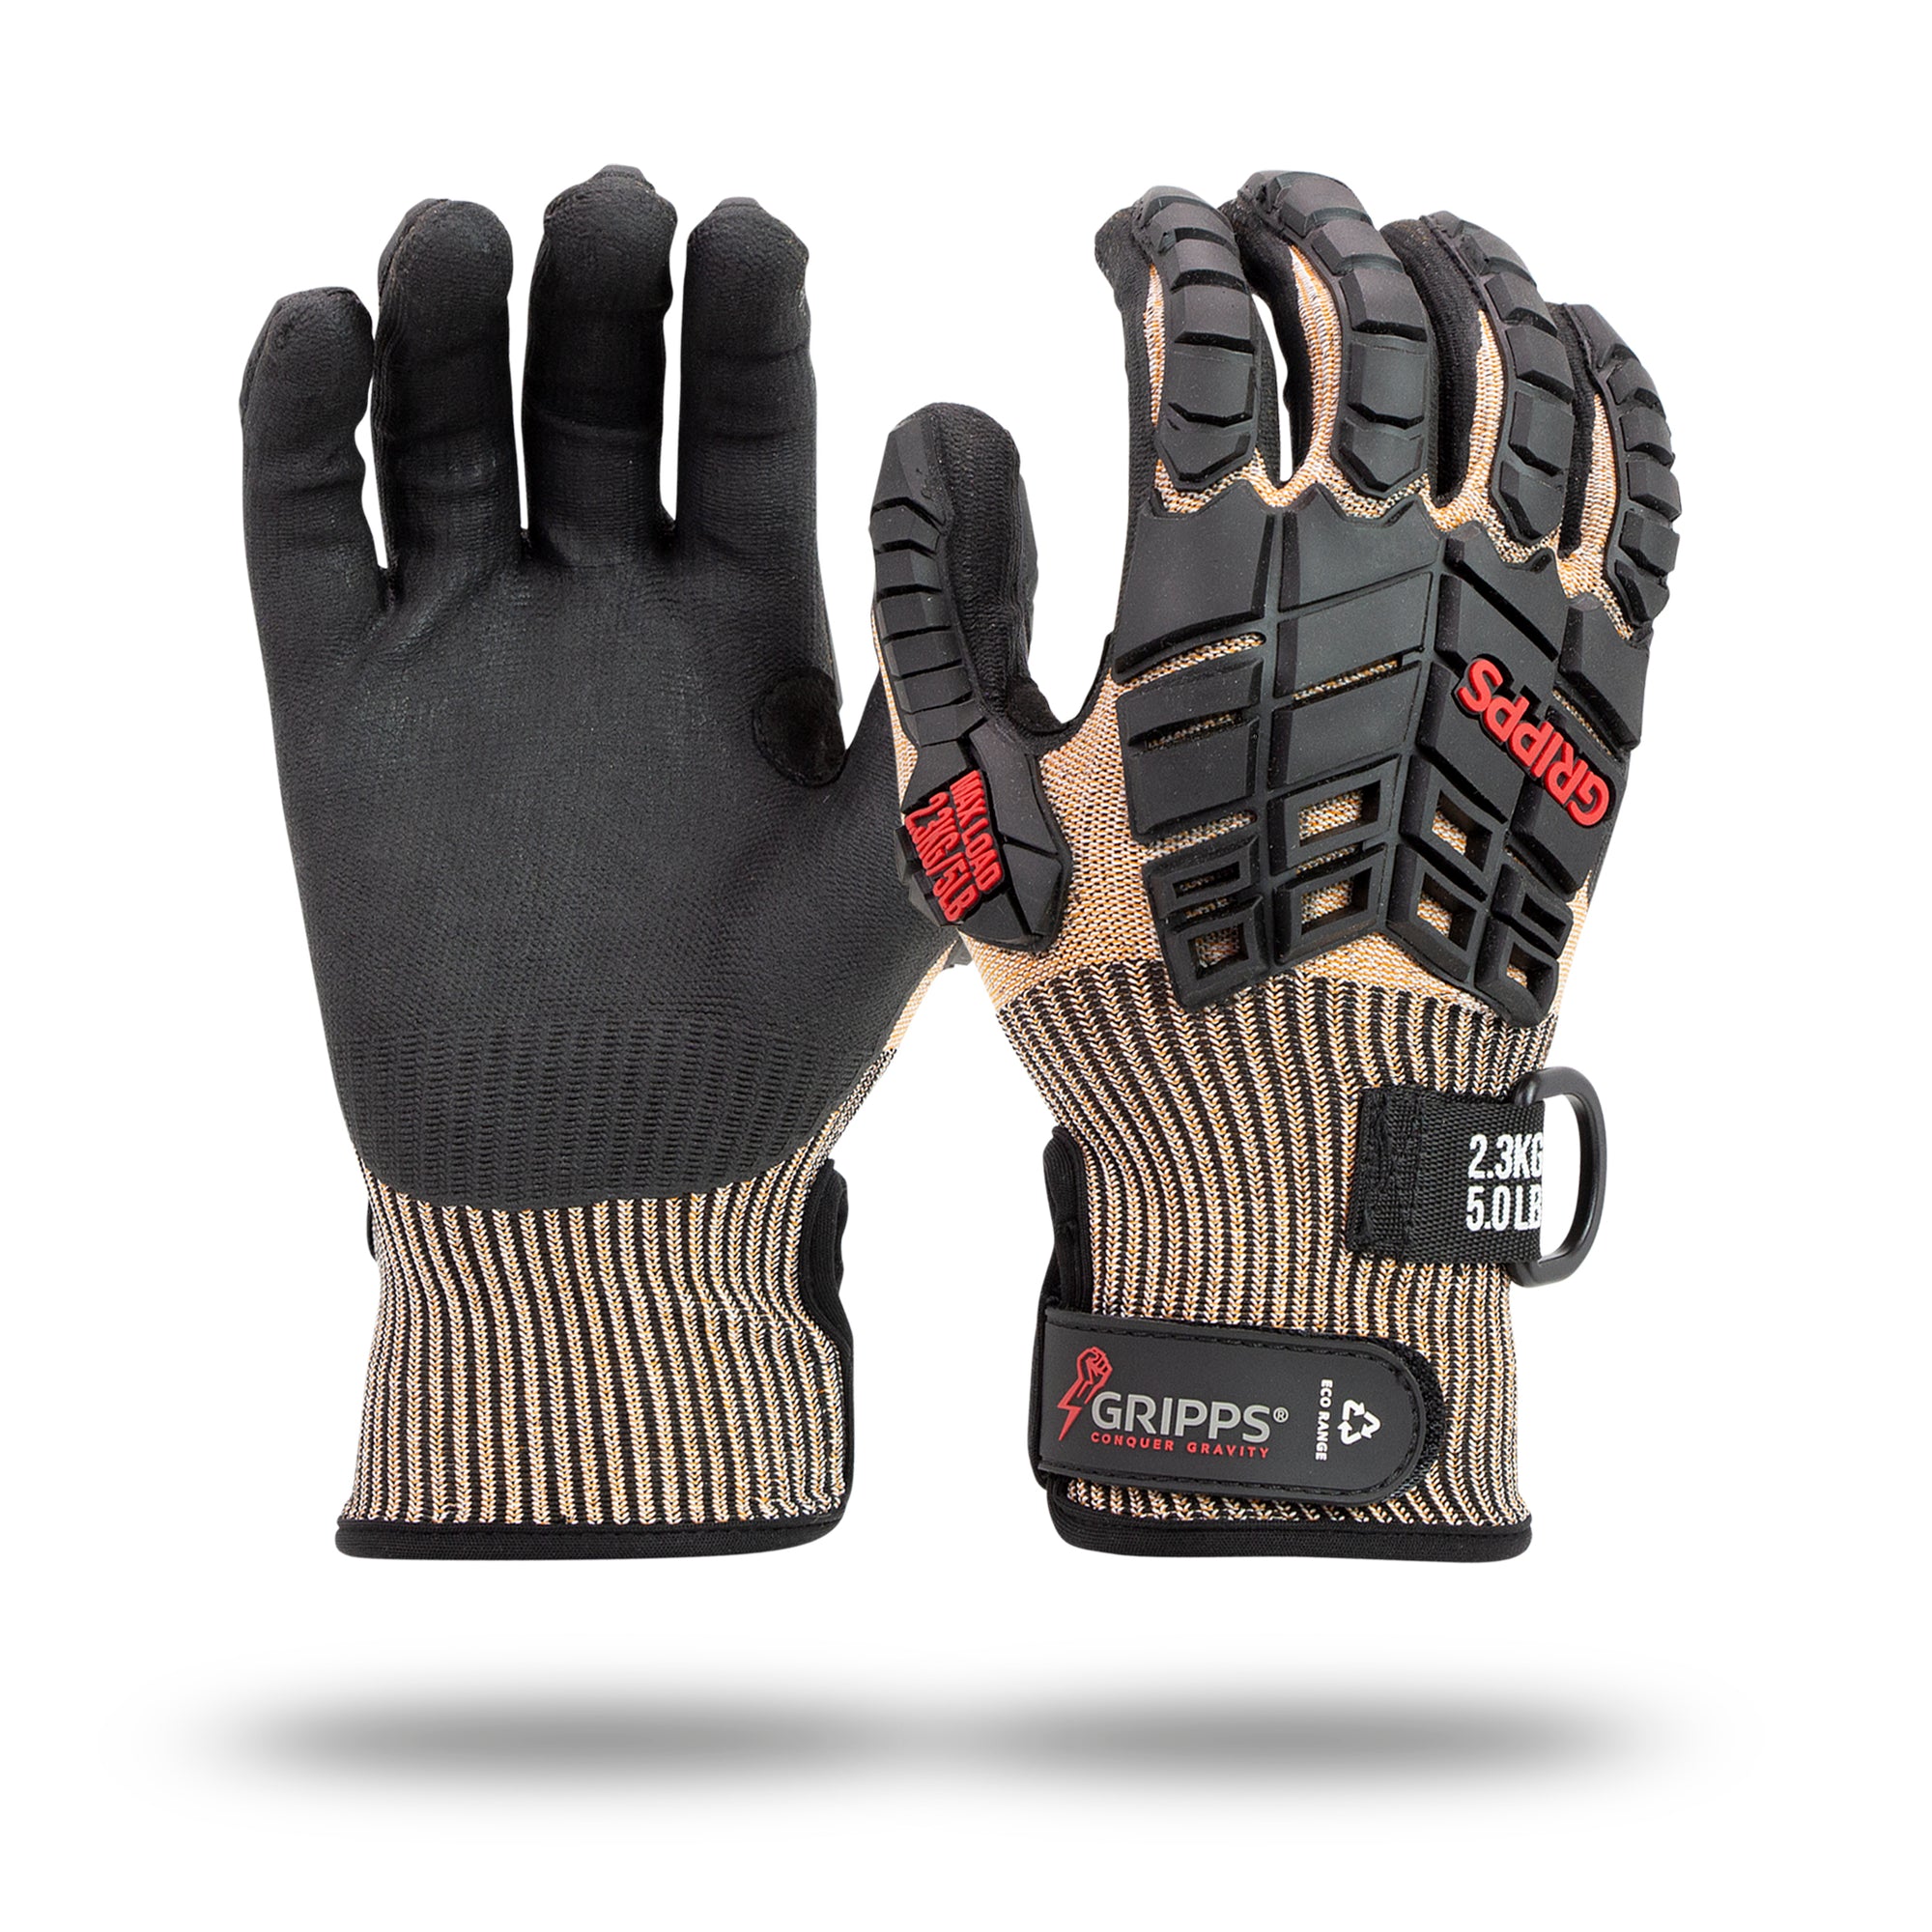 Gripps C5 Eco A5 Impact Gloves from Columbia Safety